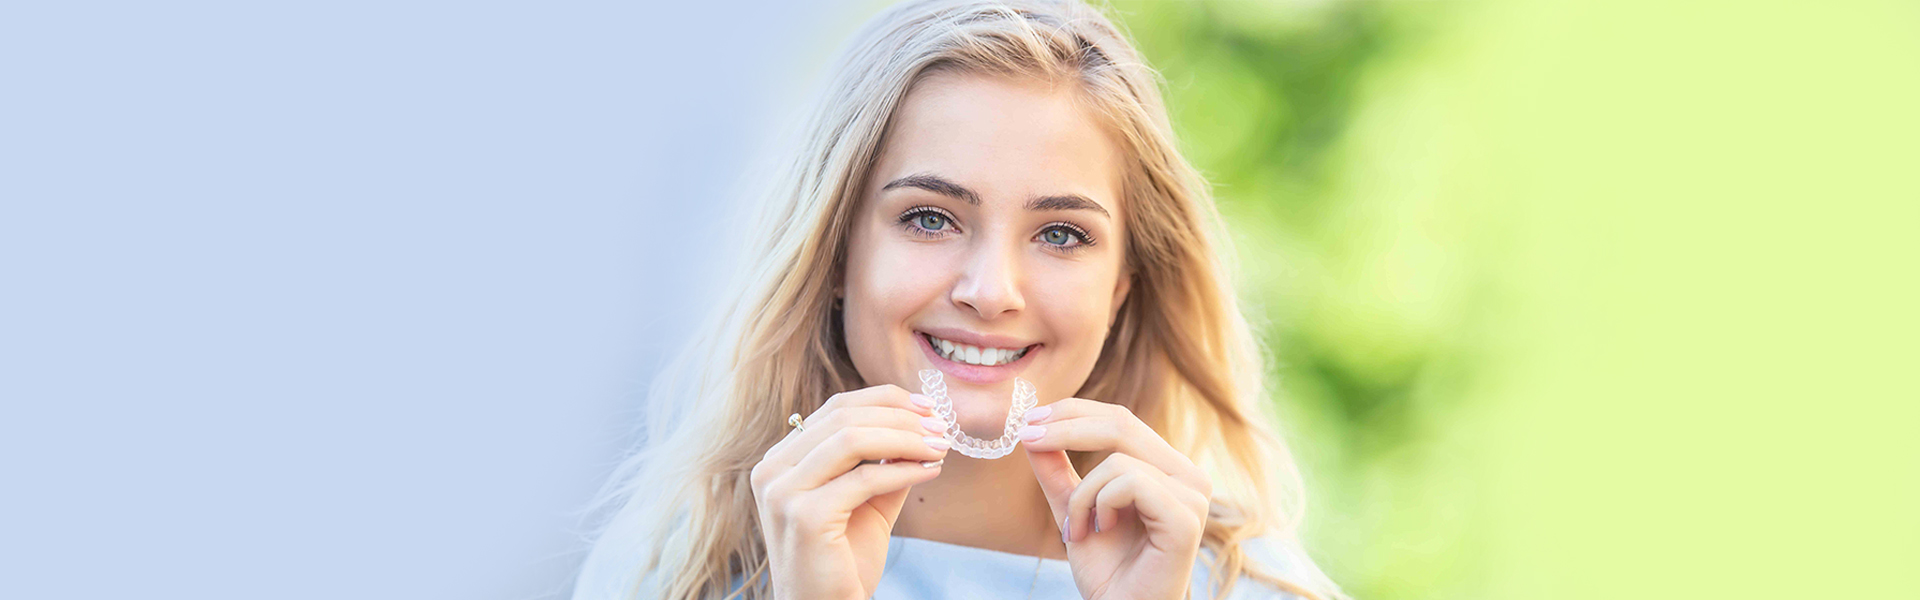 Invisalign: The Perfect New Year’s Resolution For A Better Smile